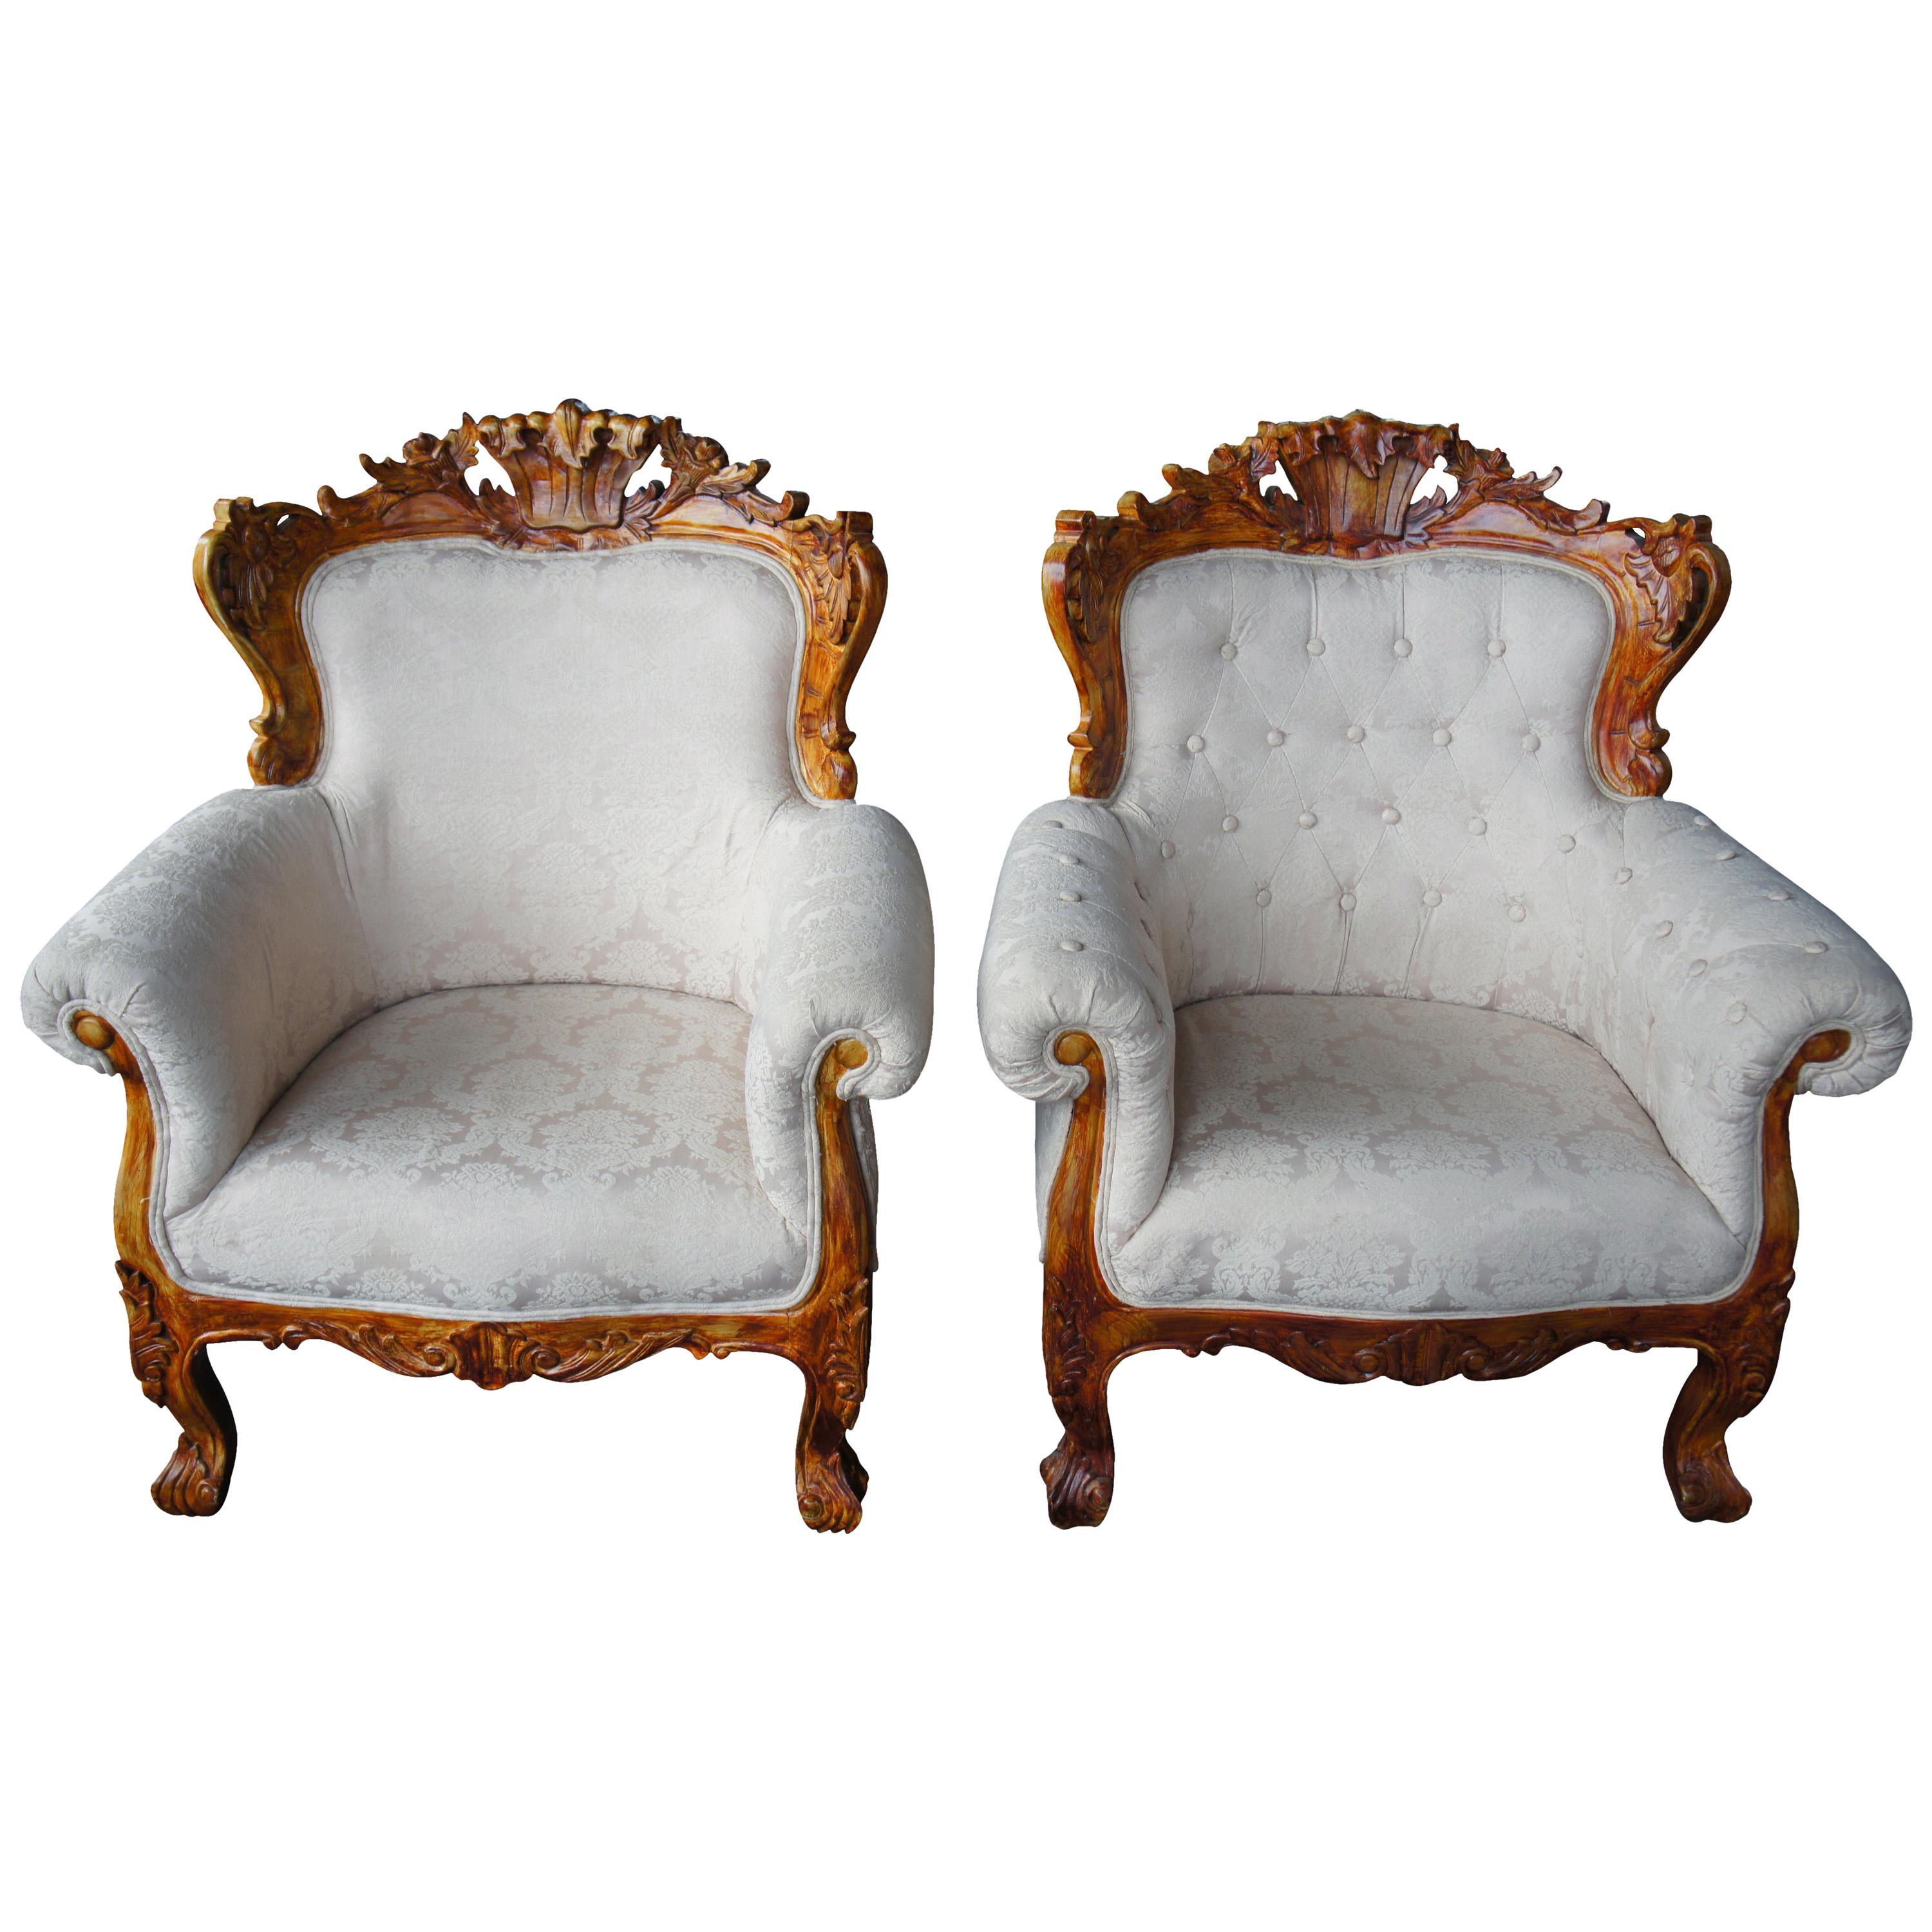 Antiqued Baroque Rococo High Relief Carved Club Chairs Continental Brocade Seat